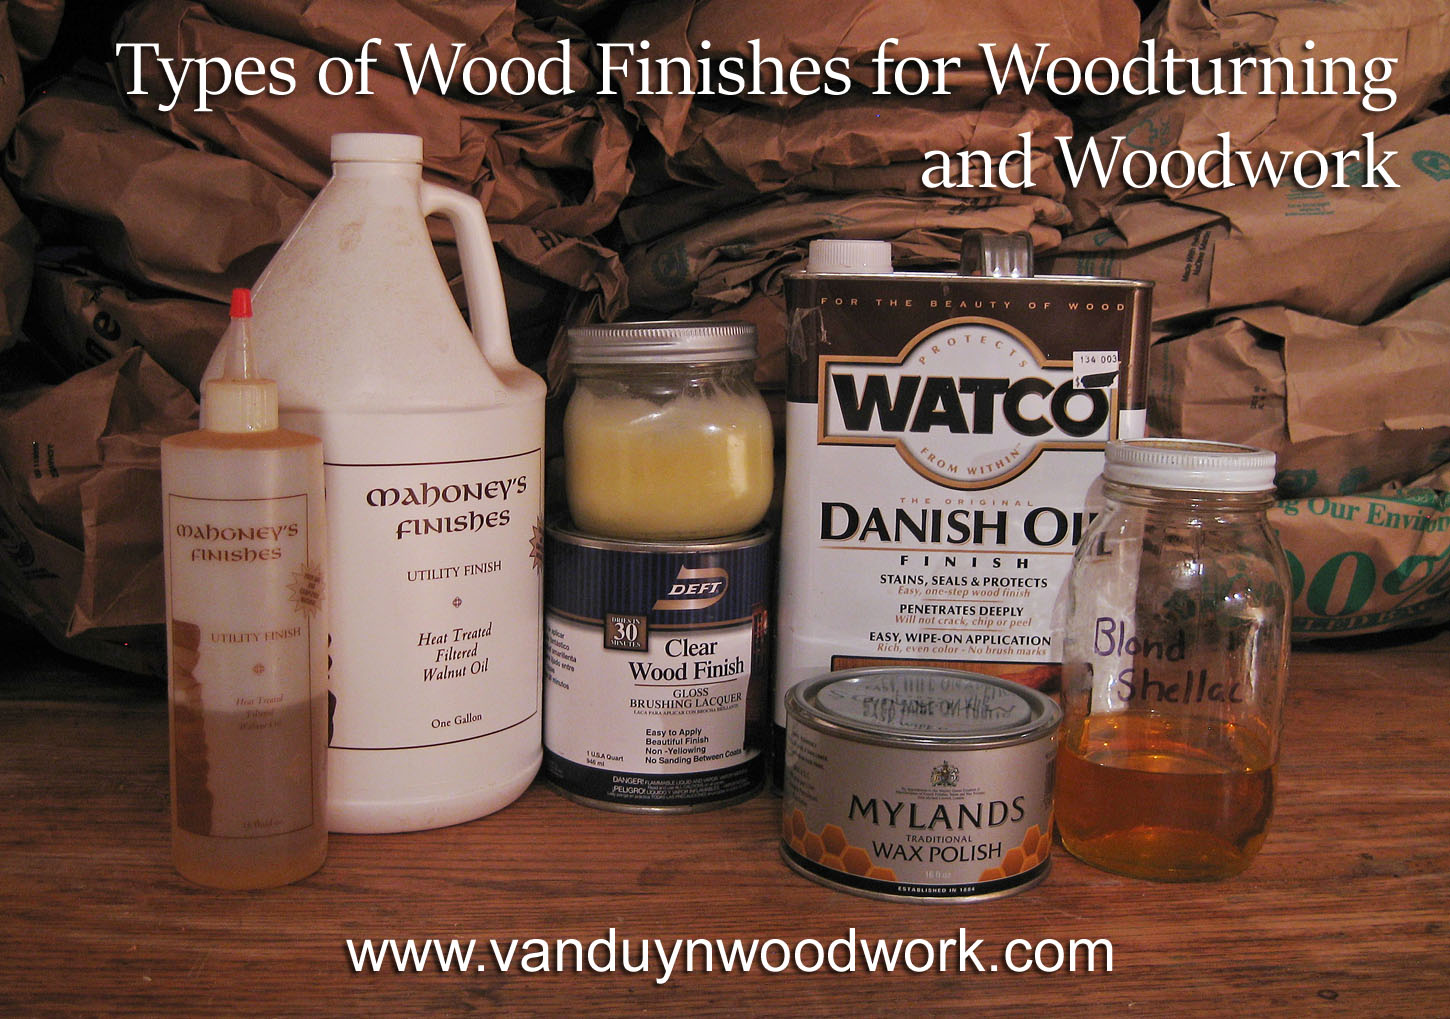 Woodturning finishes from Doctor's Woodshop > Home